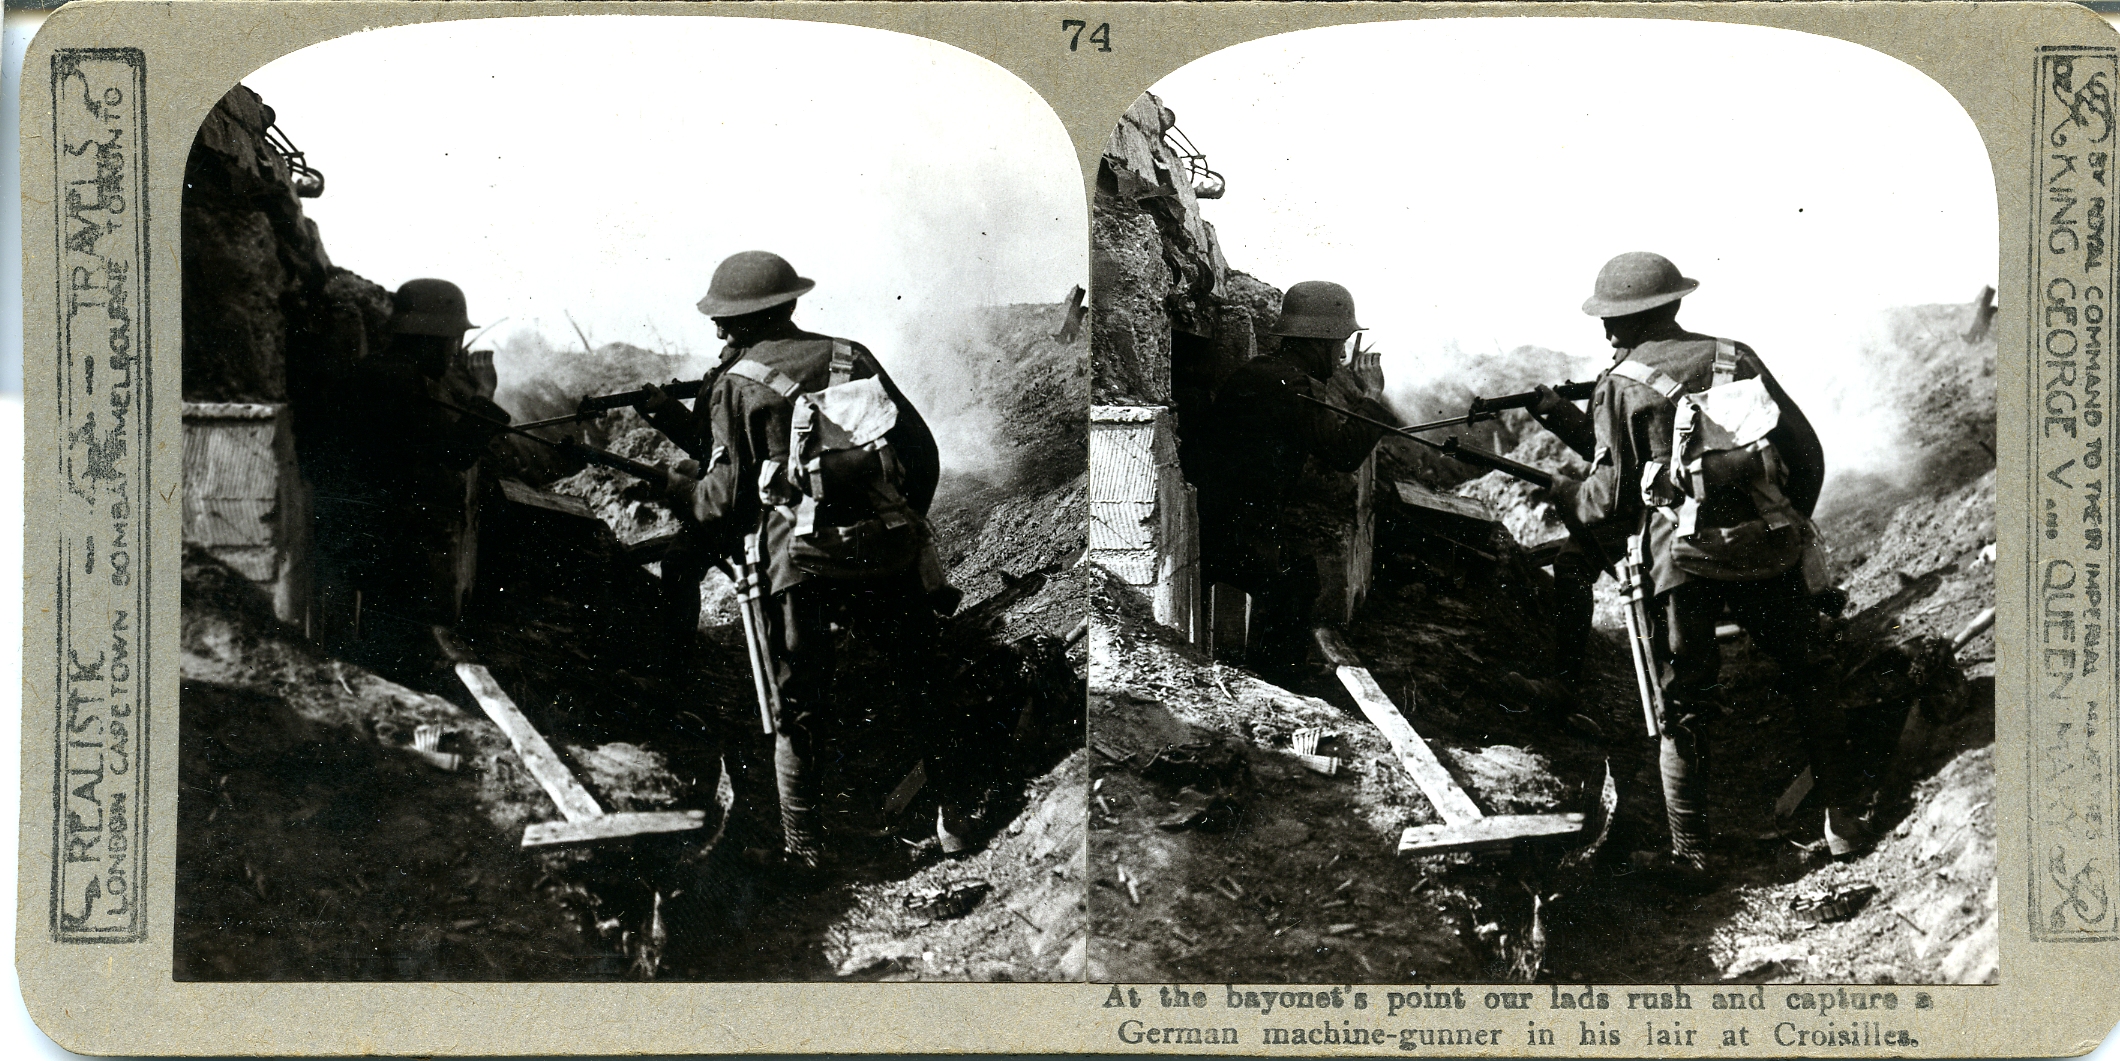 At the bayonet's point our troops surprise a Jerry machine gunner in his den at Croiselles